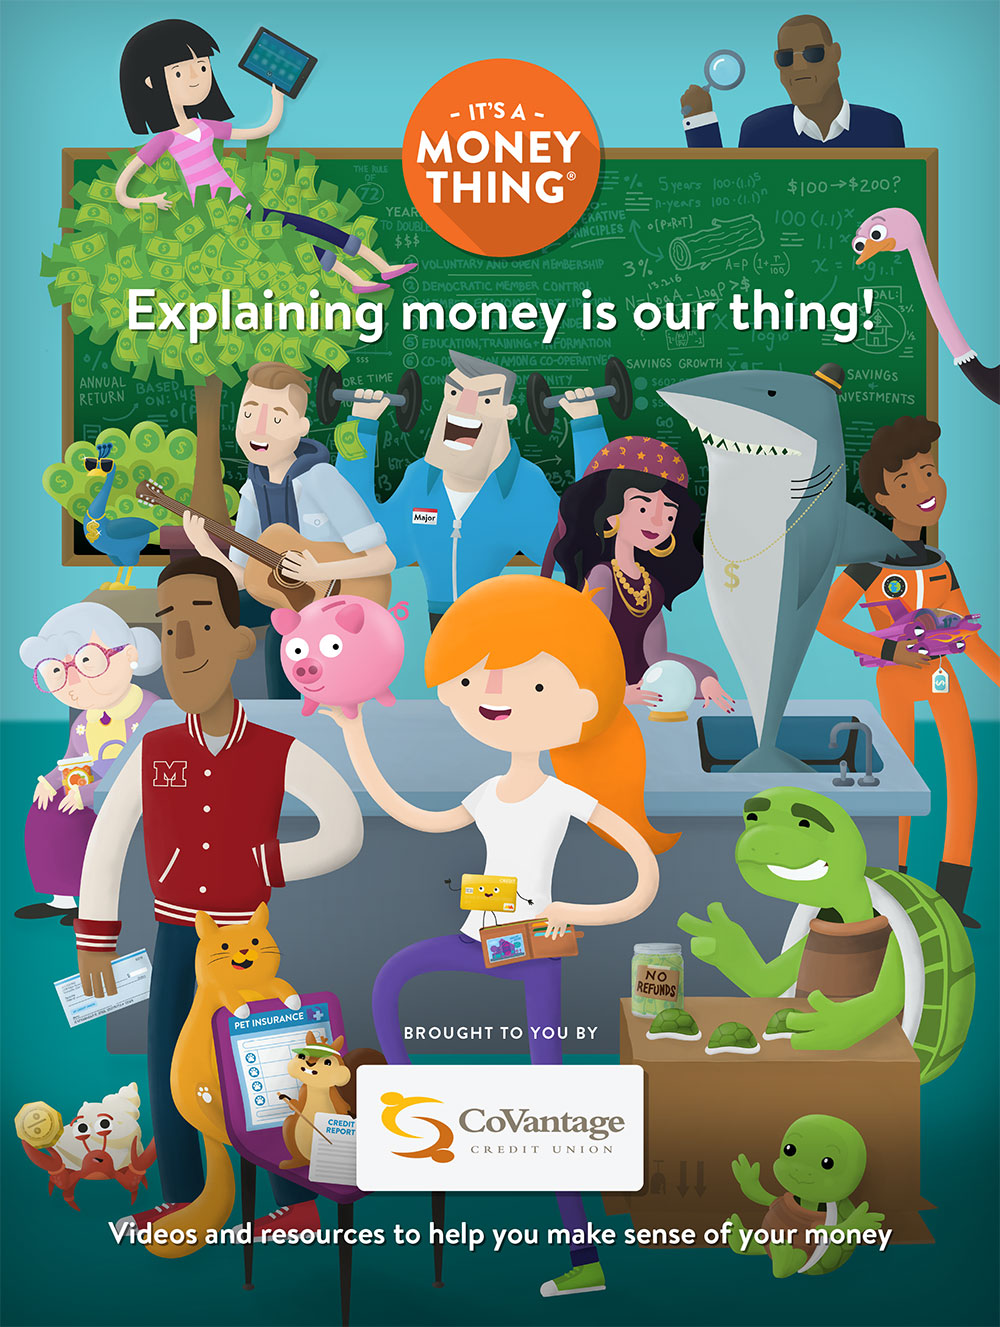 It's a money thing! Explaining money is our thing! Brought to you by Covantage Credit Union, videos and resources to help you make sense of your money.